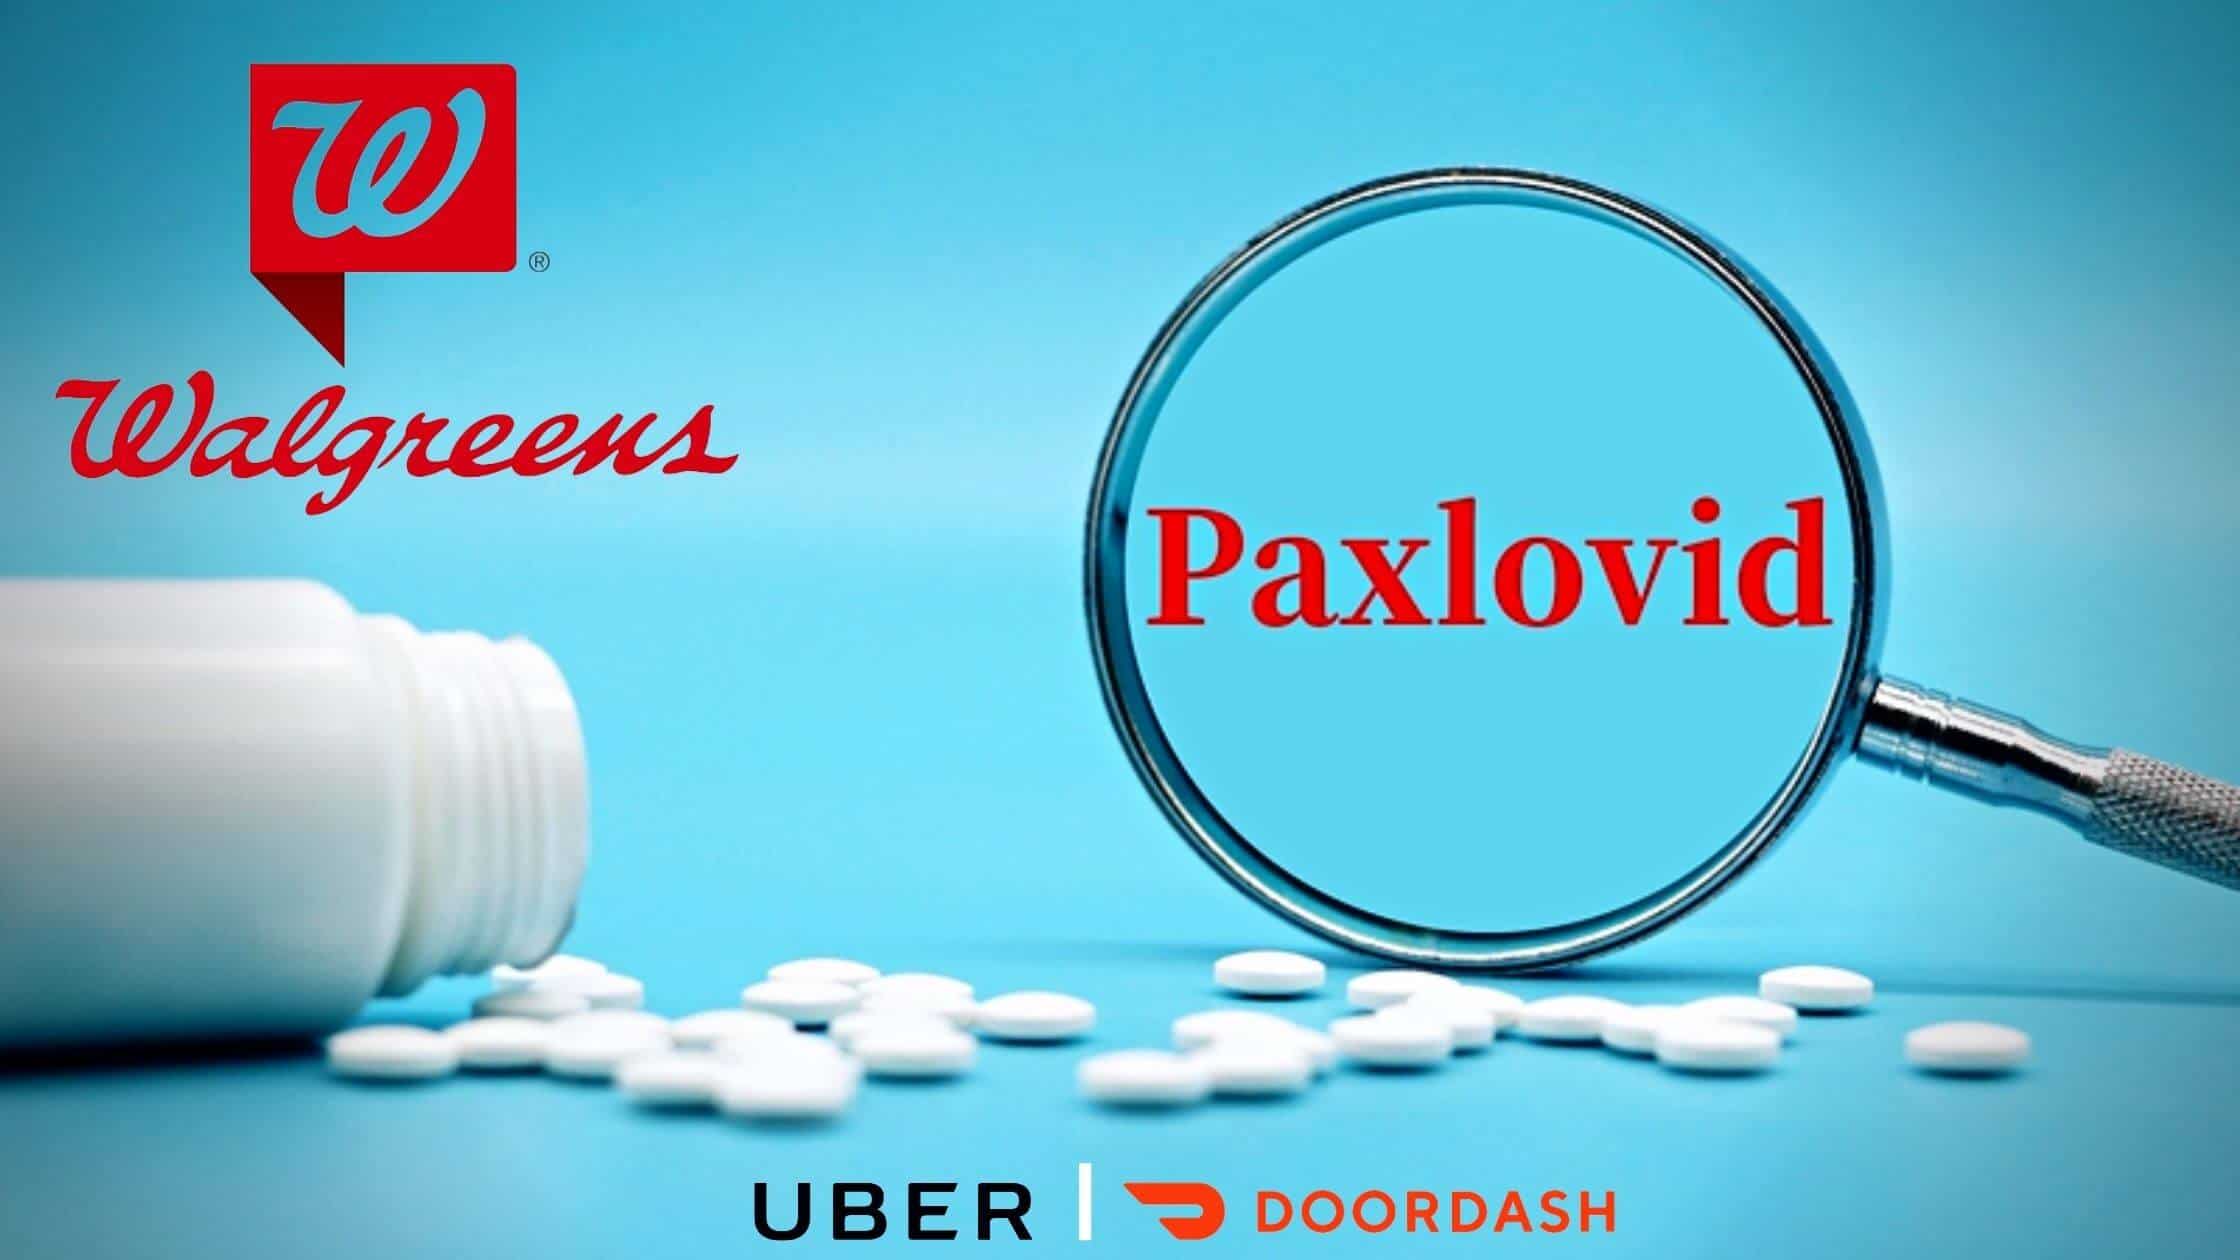 With Doordash And Uber, Walgreens Introduces A Free Paxlovid Delivery Service